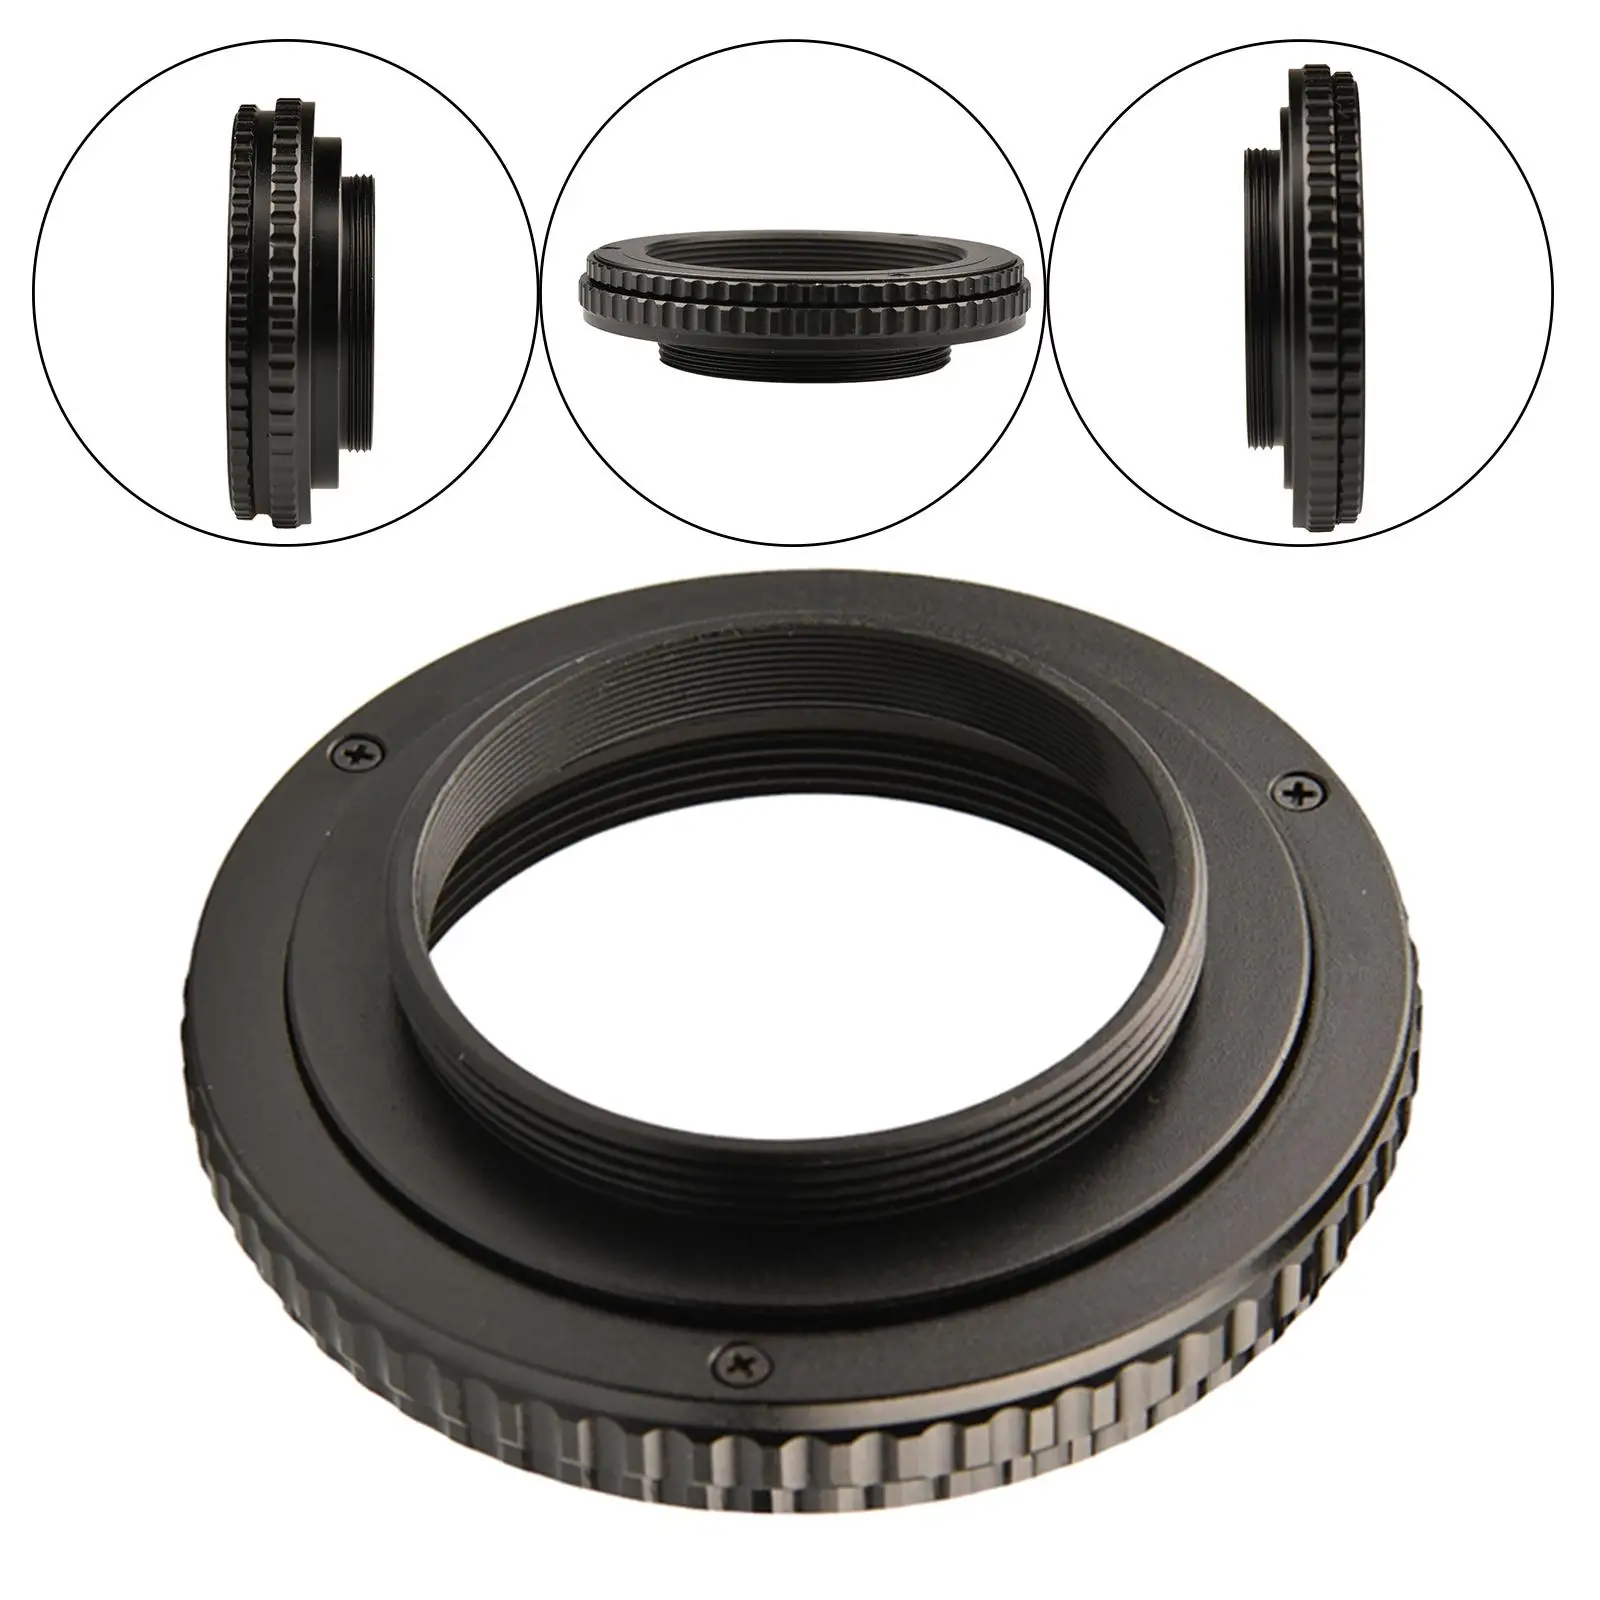 Extension Tube Adapter   Installation Adjustable Focusing for  Photography